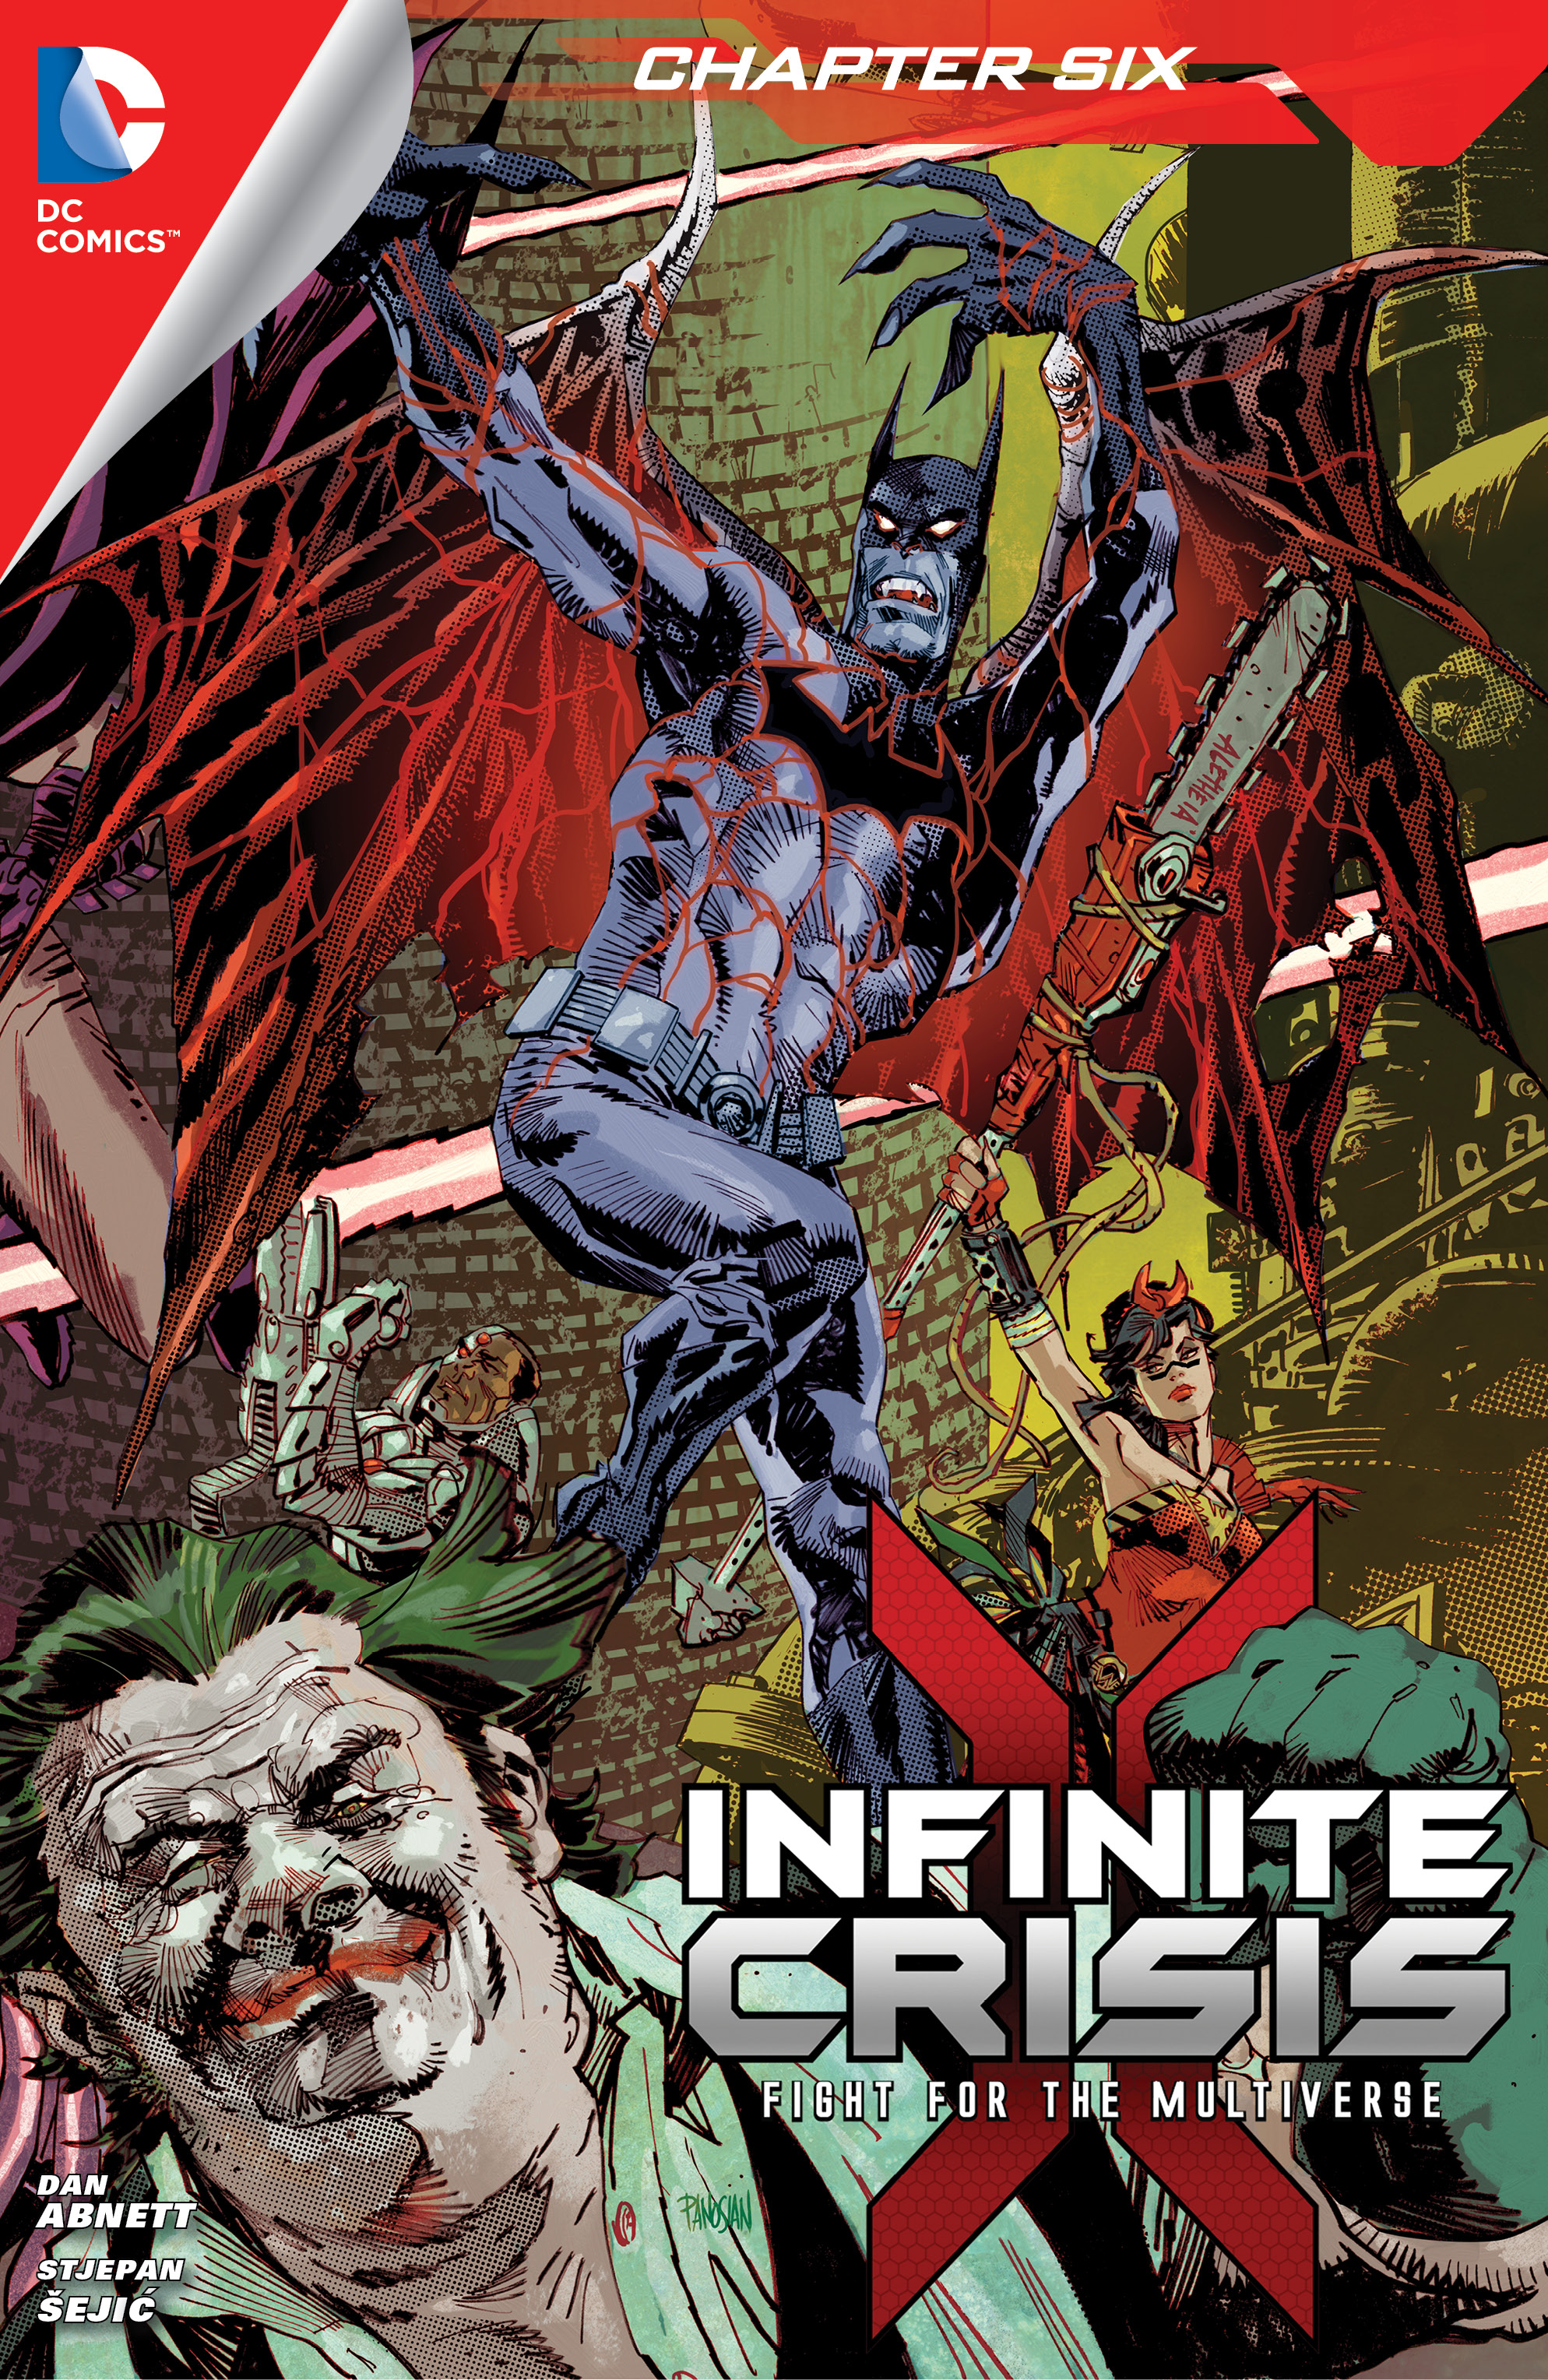 Infinite Crisis: Fight for the Multiverse #17 preview images